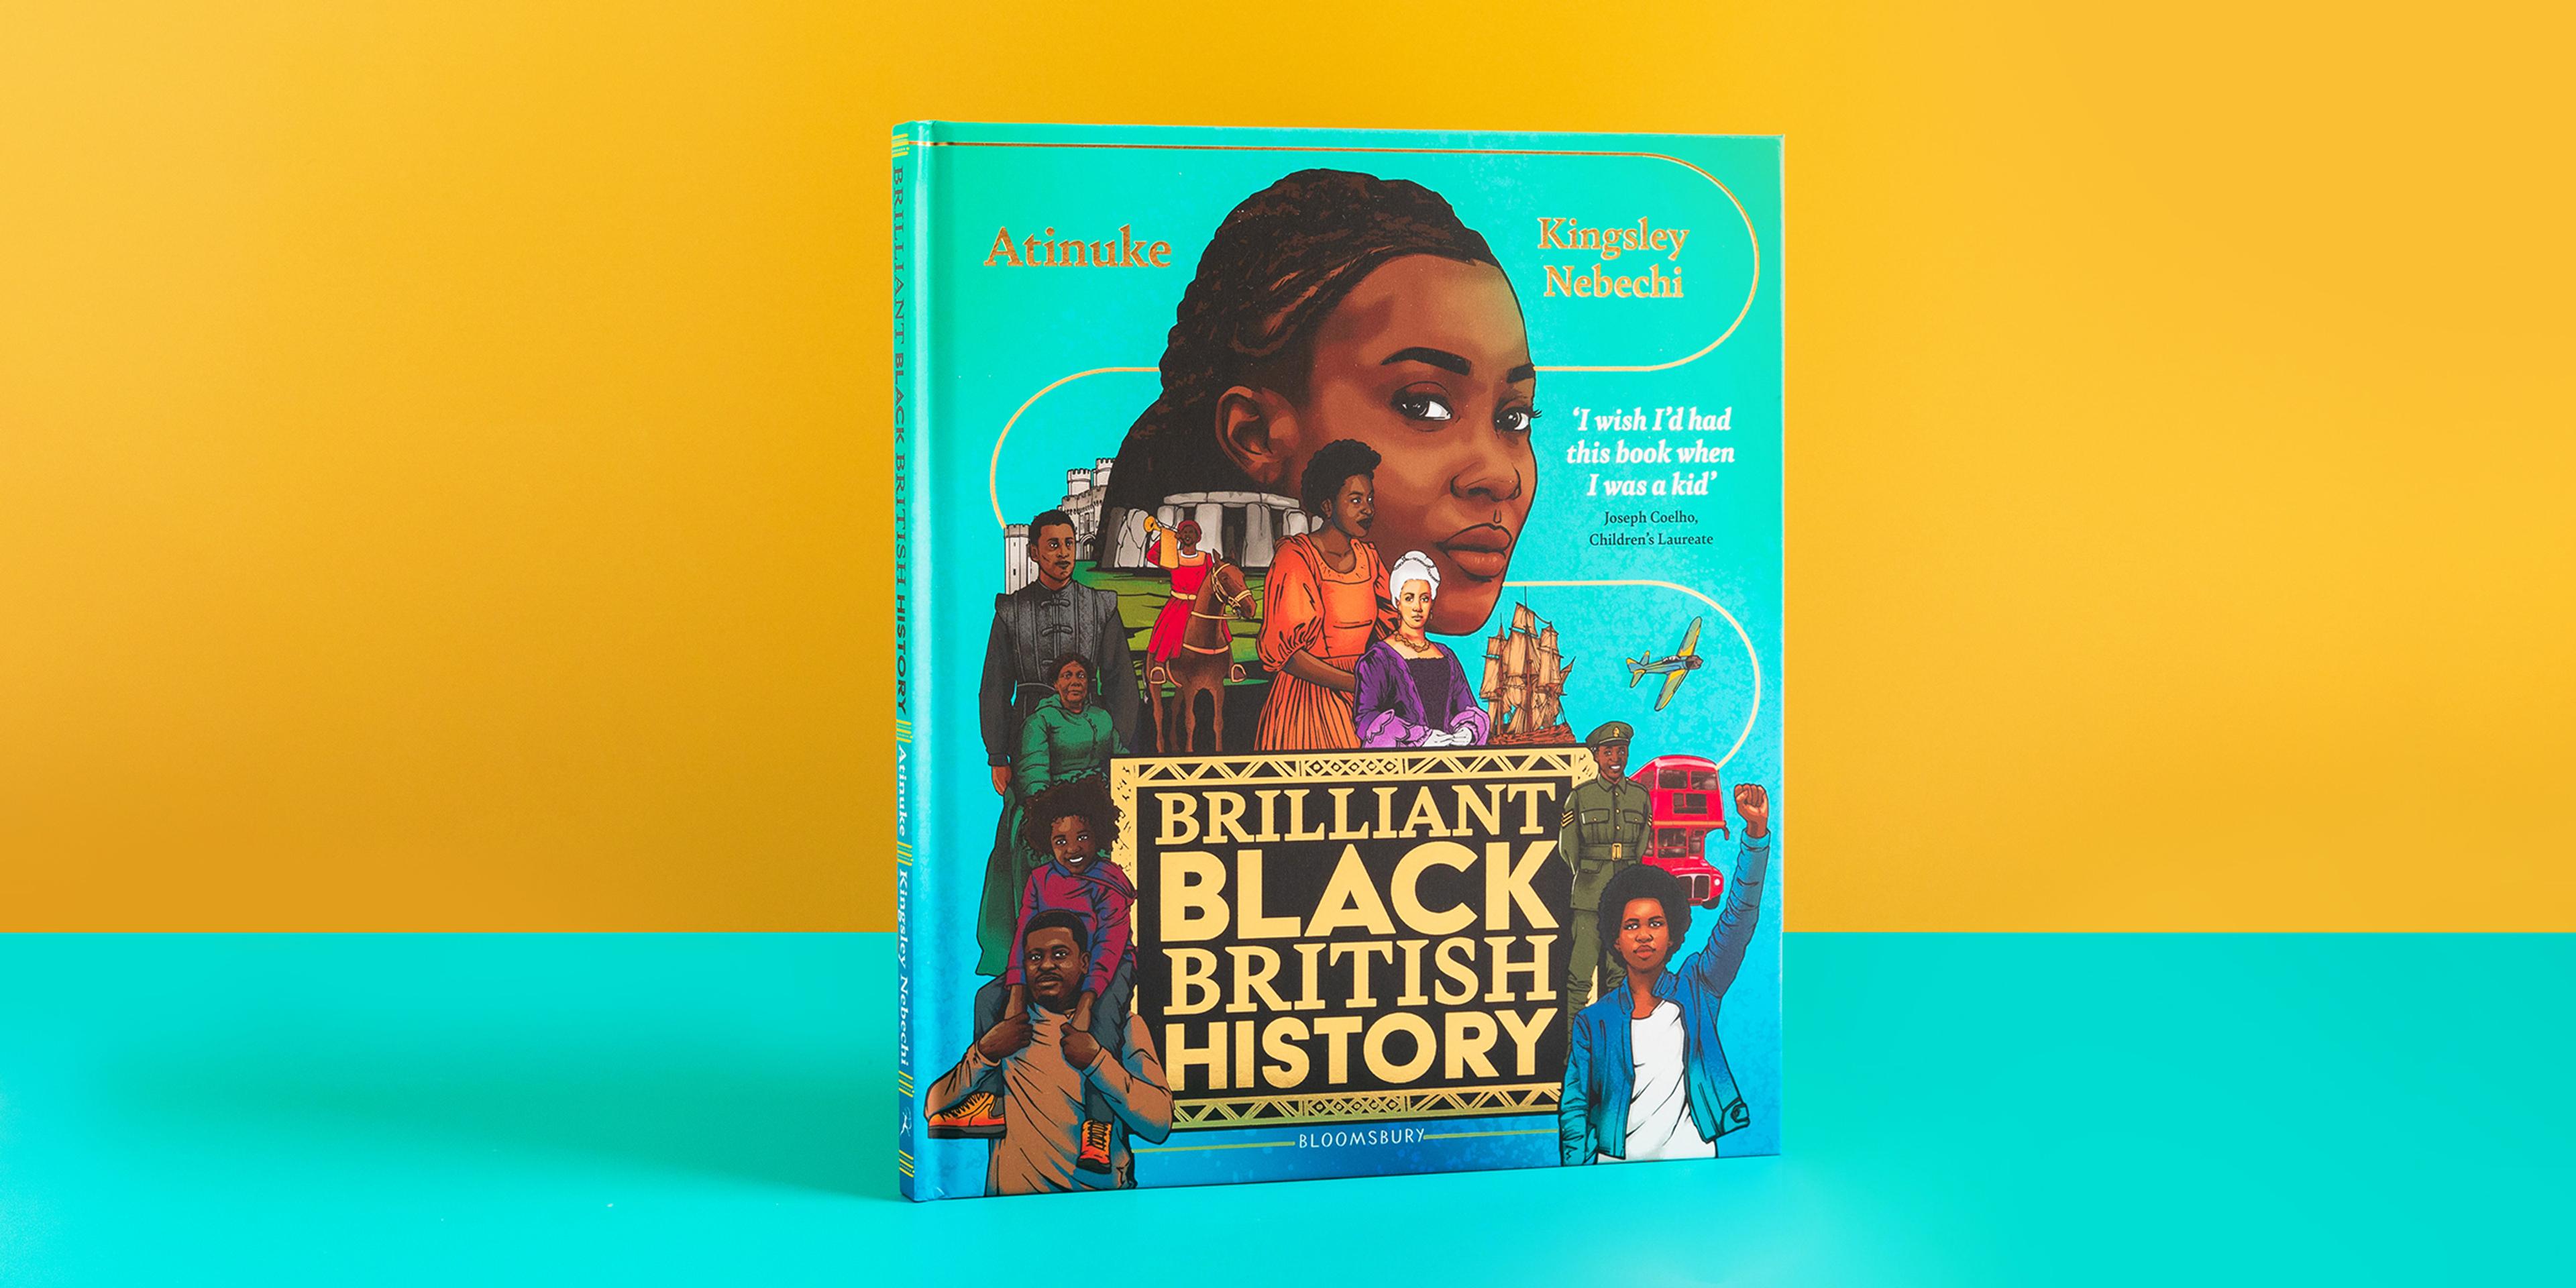 A photograph of a copy of Brilliant Black British History, featuring a number of illustrated faces and figures, arranged around the book title. On a yellow and green backdrop.